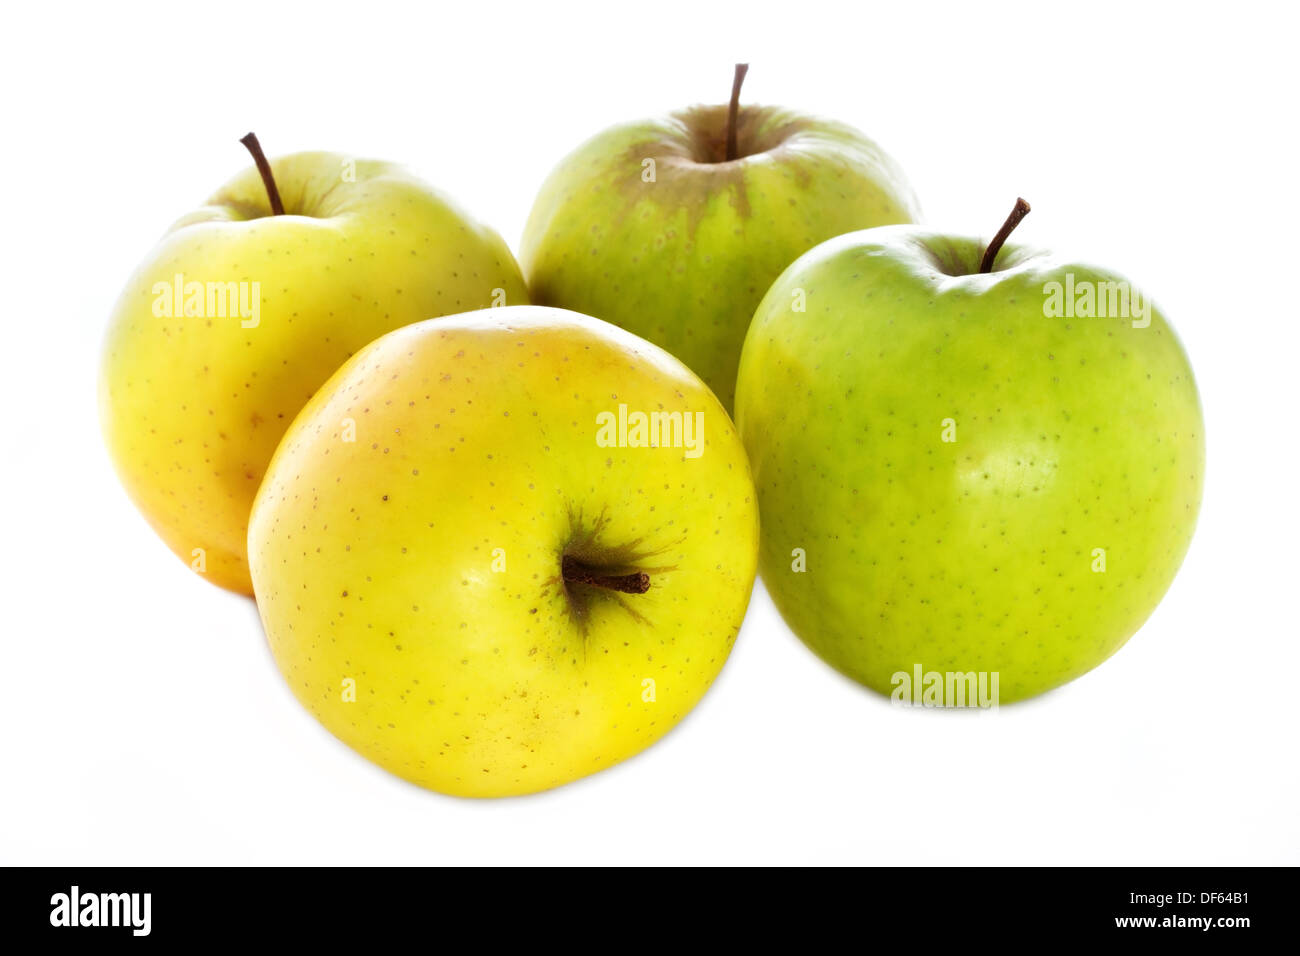 four fresh yellow green apples isolated on a white background Stock Photo